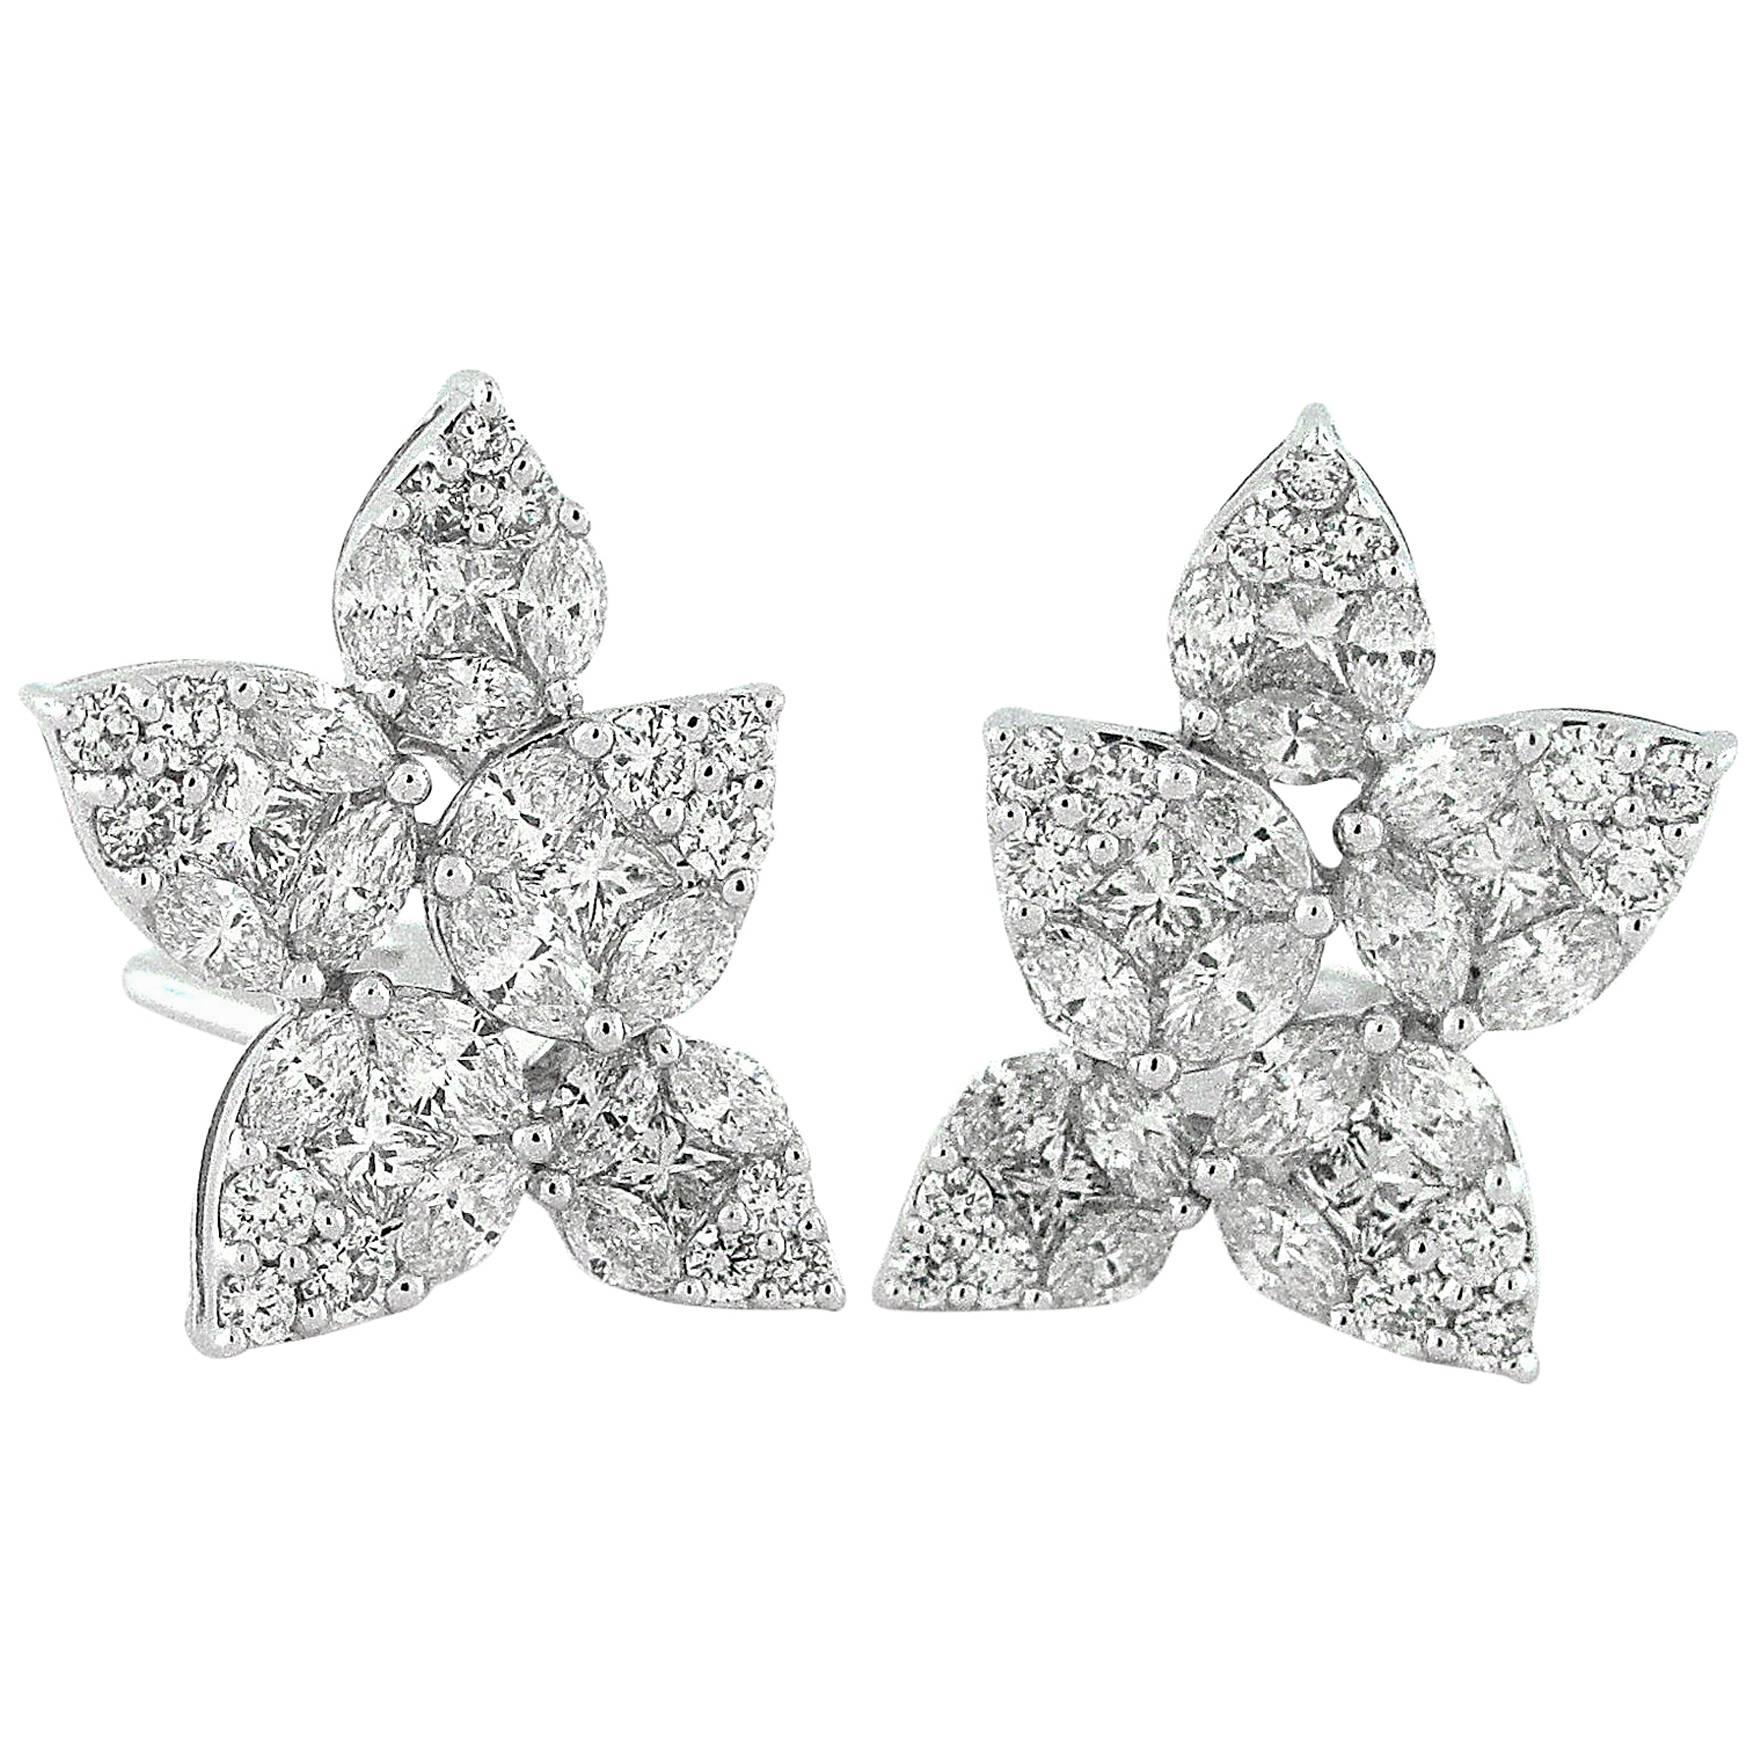 Illusion Harry Winston Style Cluster Earrings For Sale